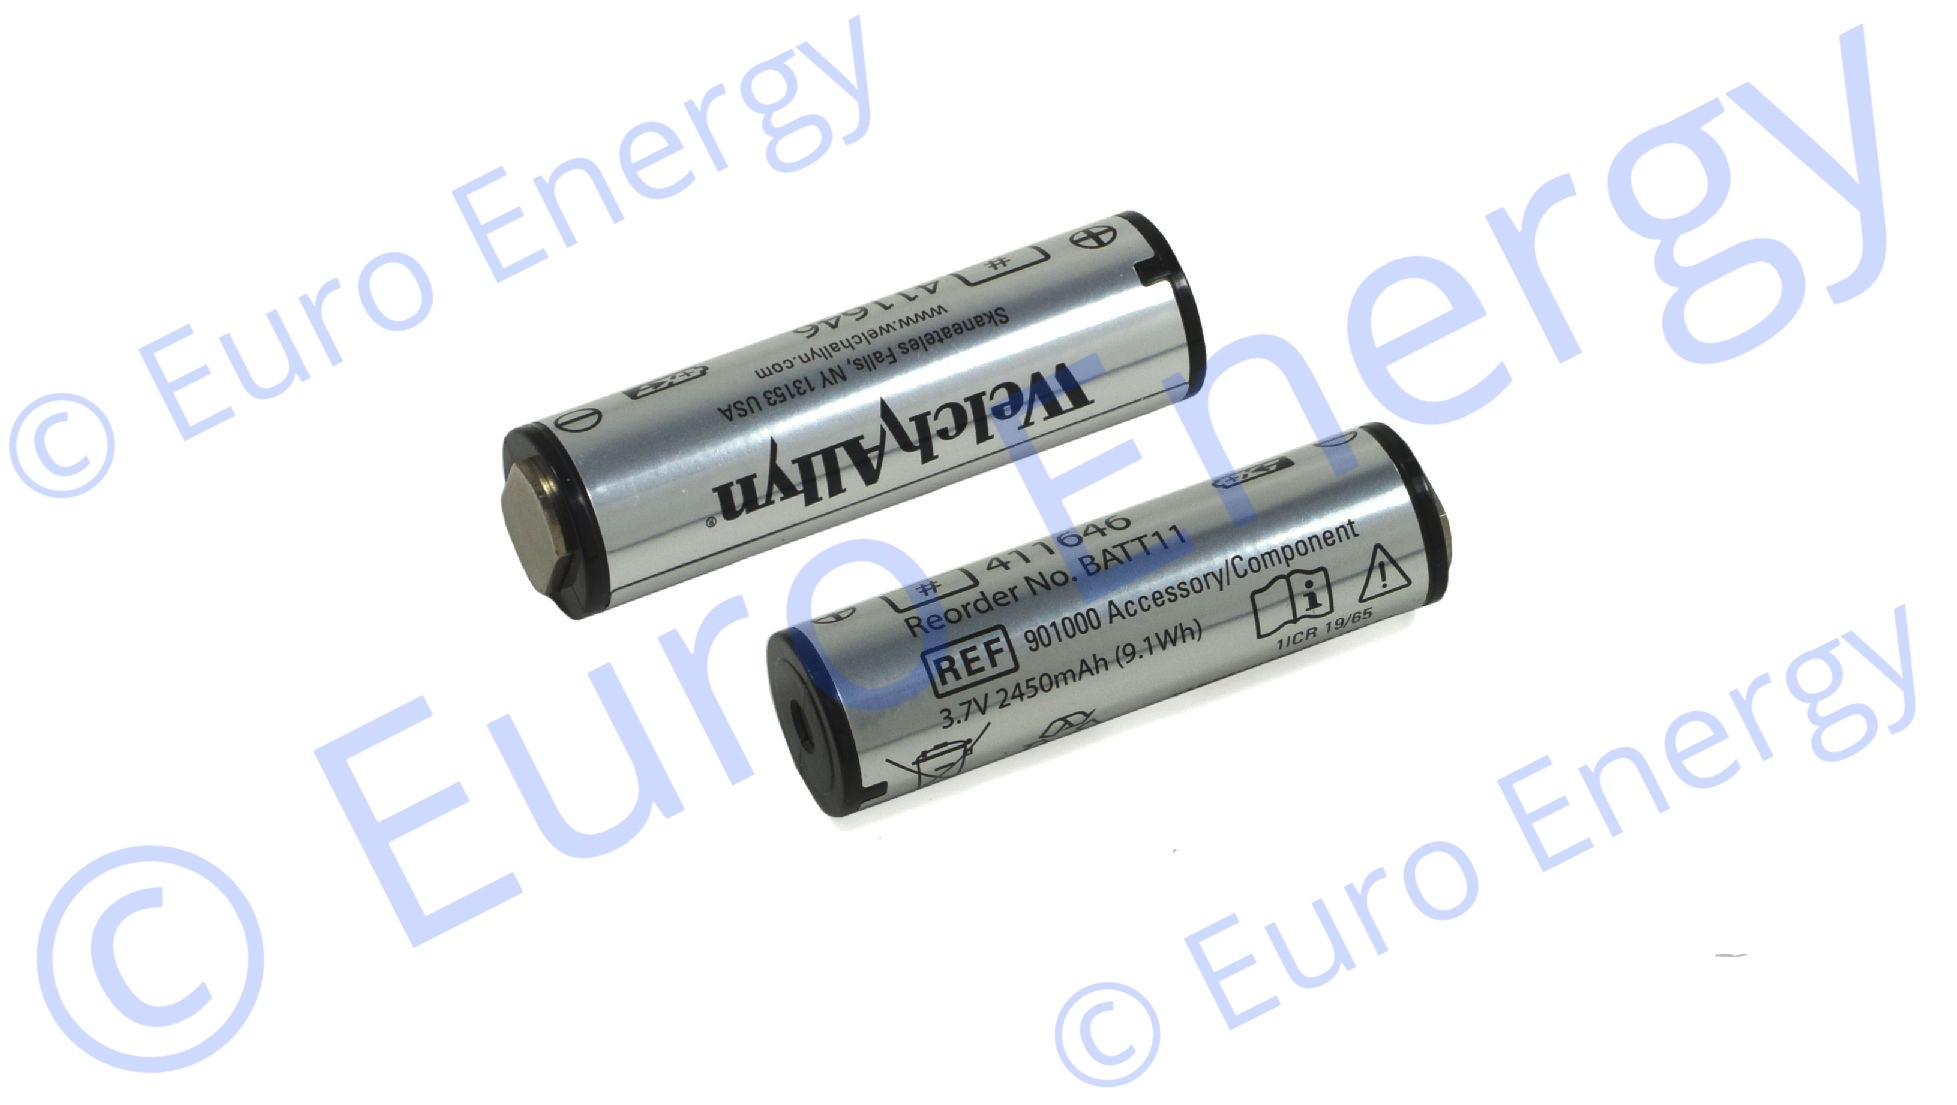 Batterie Lithium Polymere 3.7V - Euro-Makers